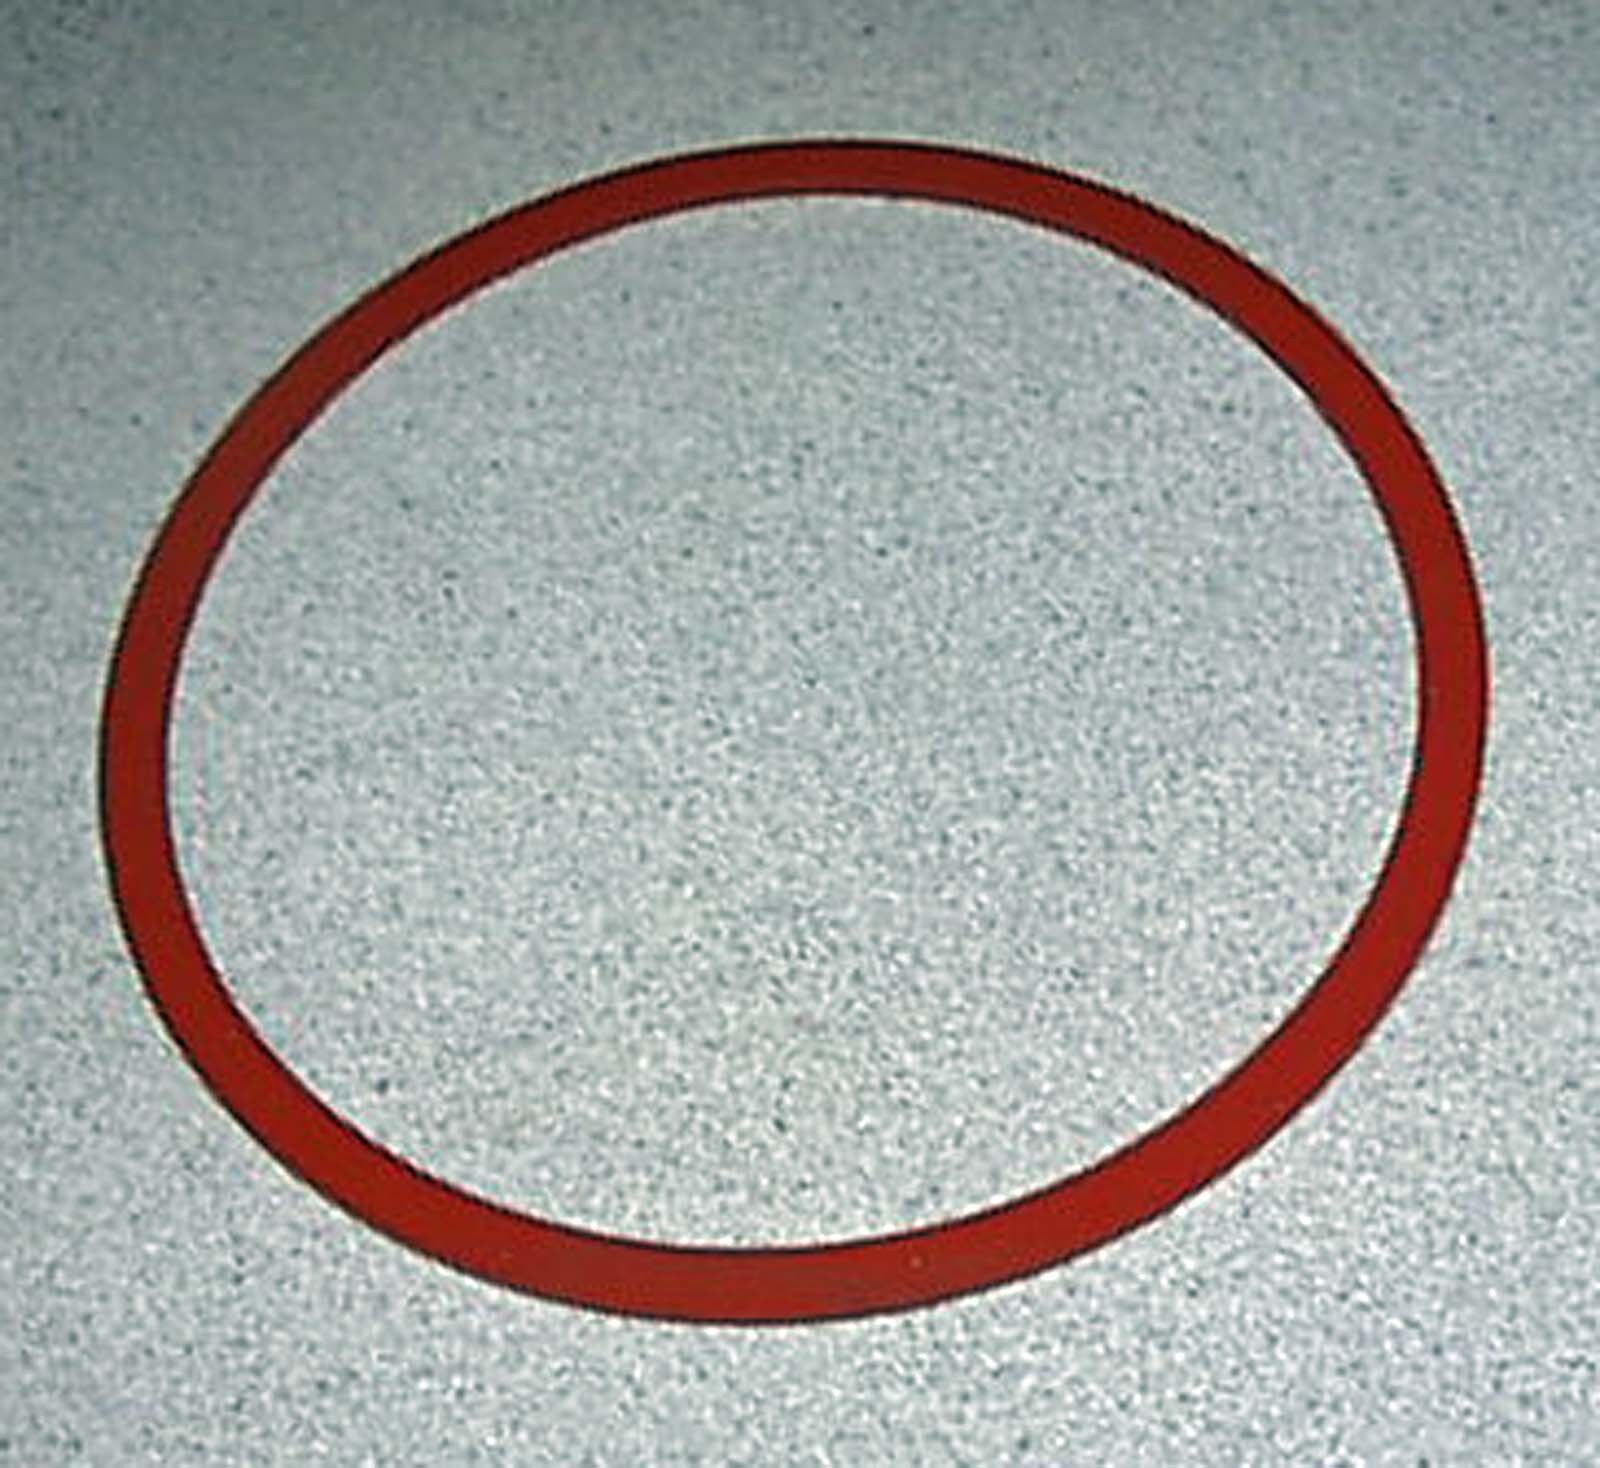 NEW Chicken Bucket Replacement GASKET SEAL Wear-Ever Cooker 4 or 6 Quart